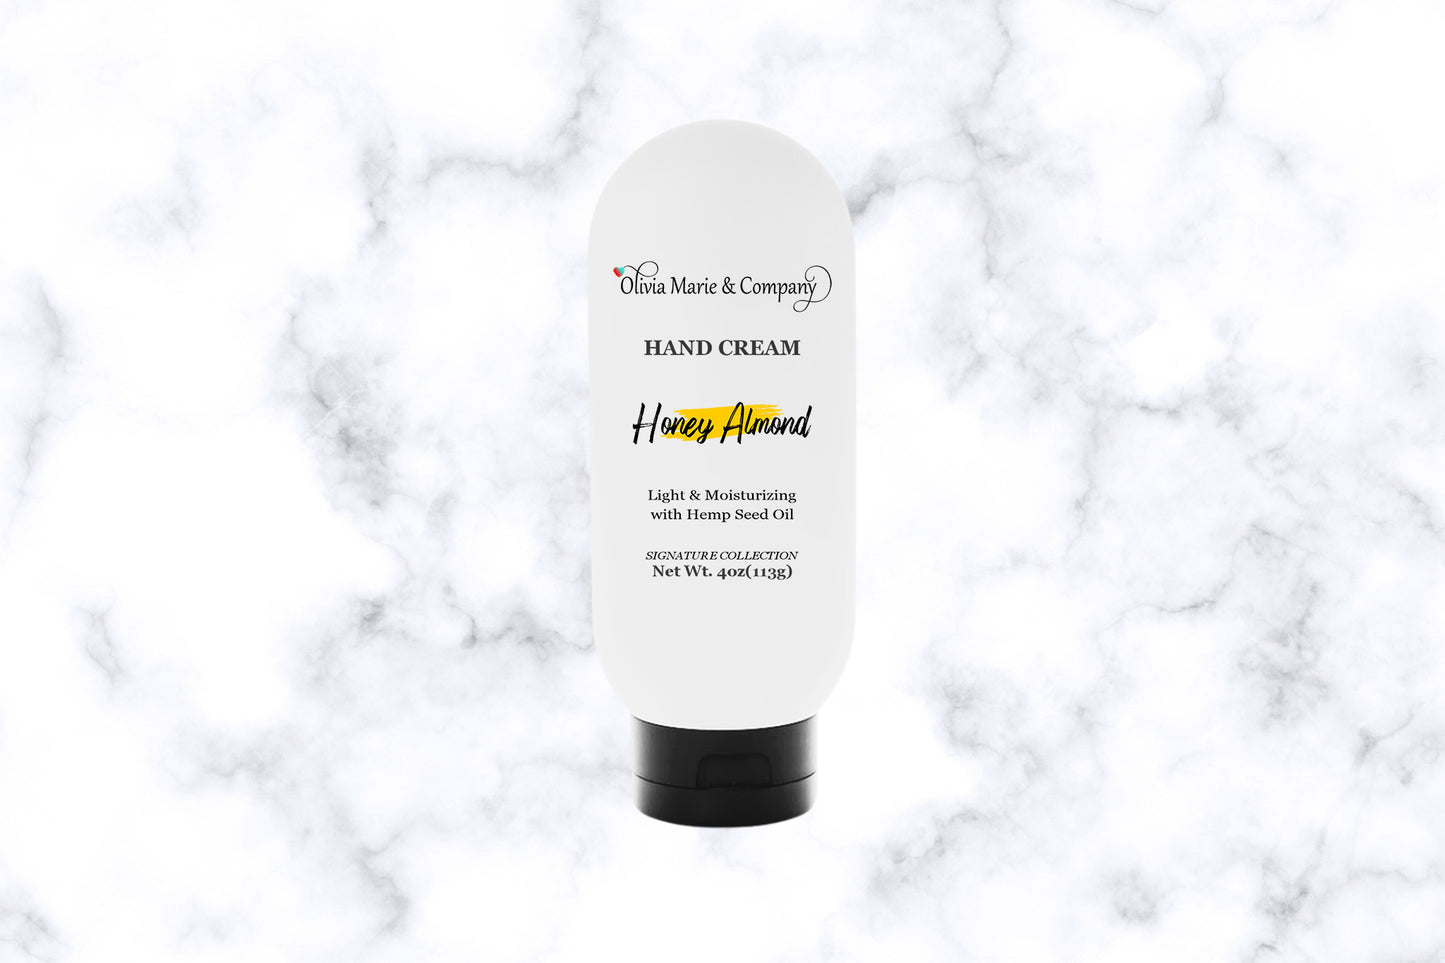 Honey Almond hand cream in a white squeeze tube with a black cap.